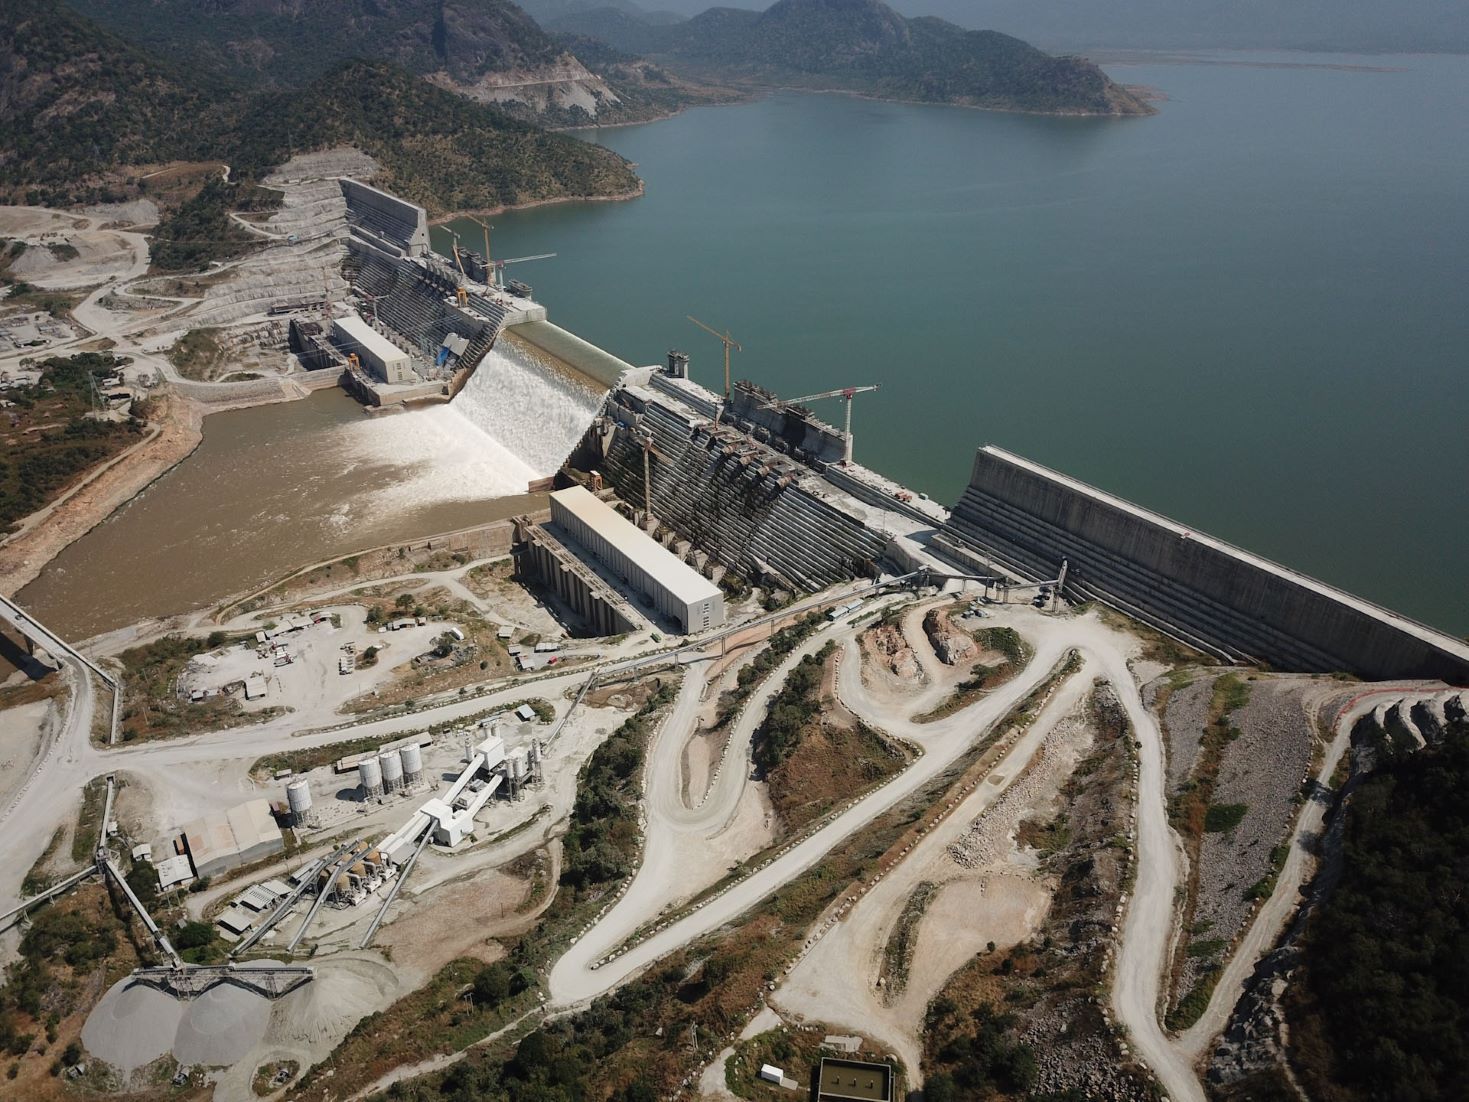 Egypt Urges Ethiopia Not To Evade Obligations To Nile Downstream Countries Over GERD Dam Operation